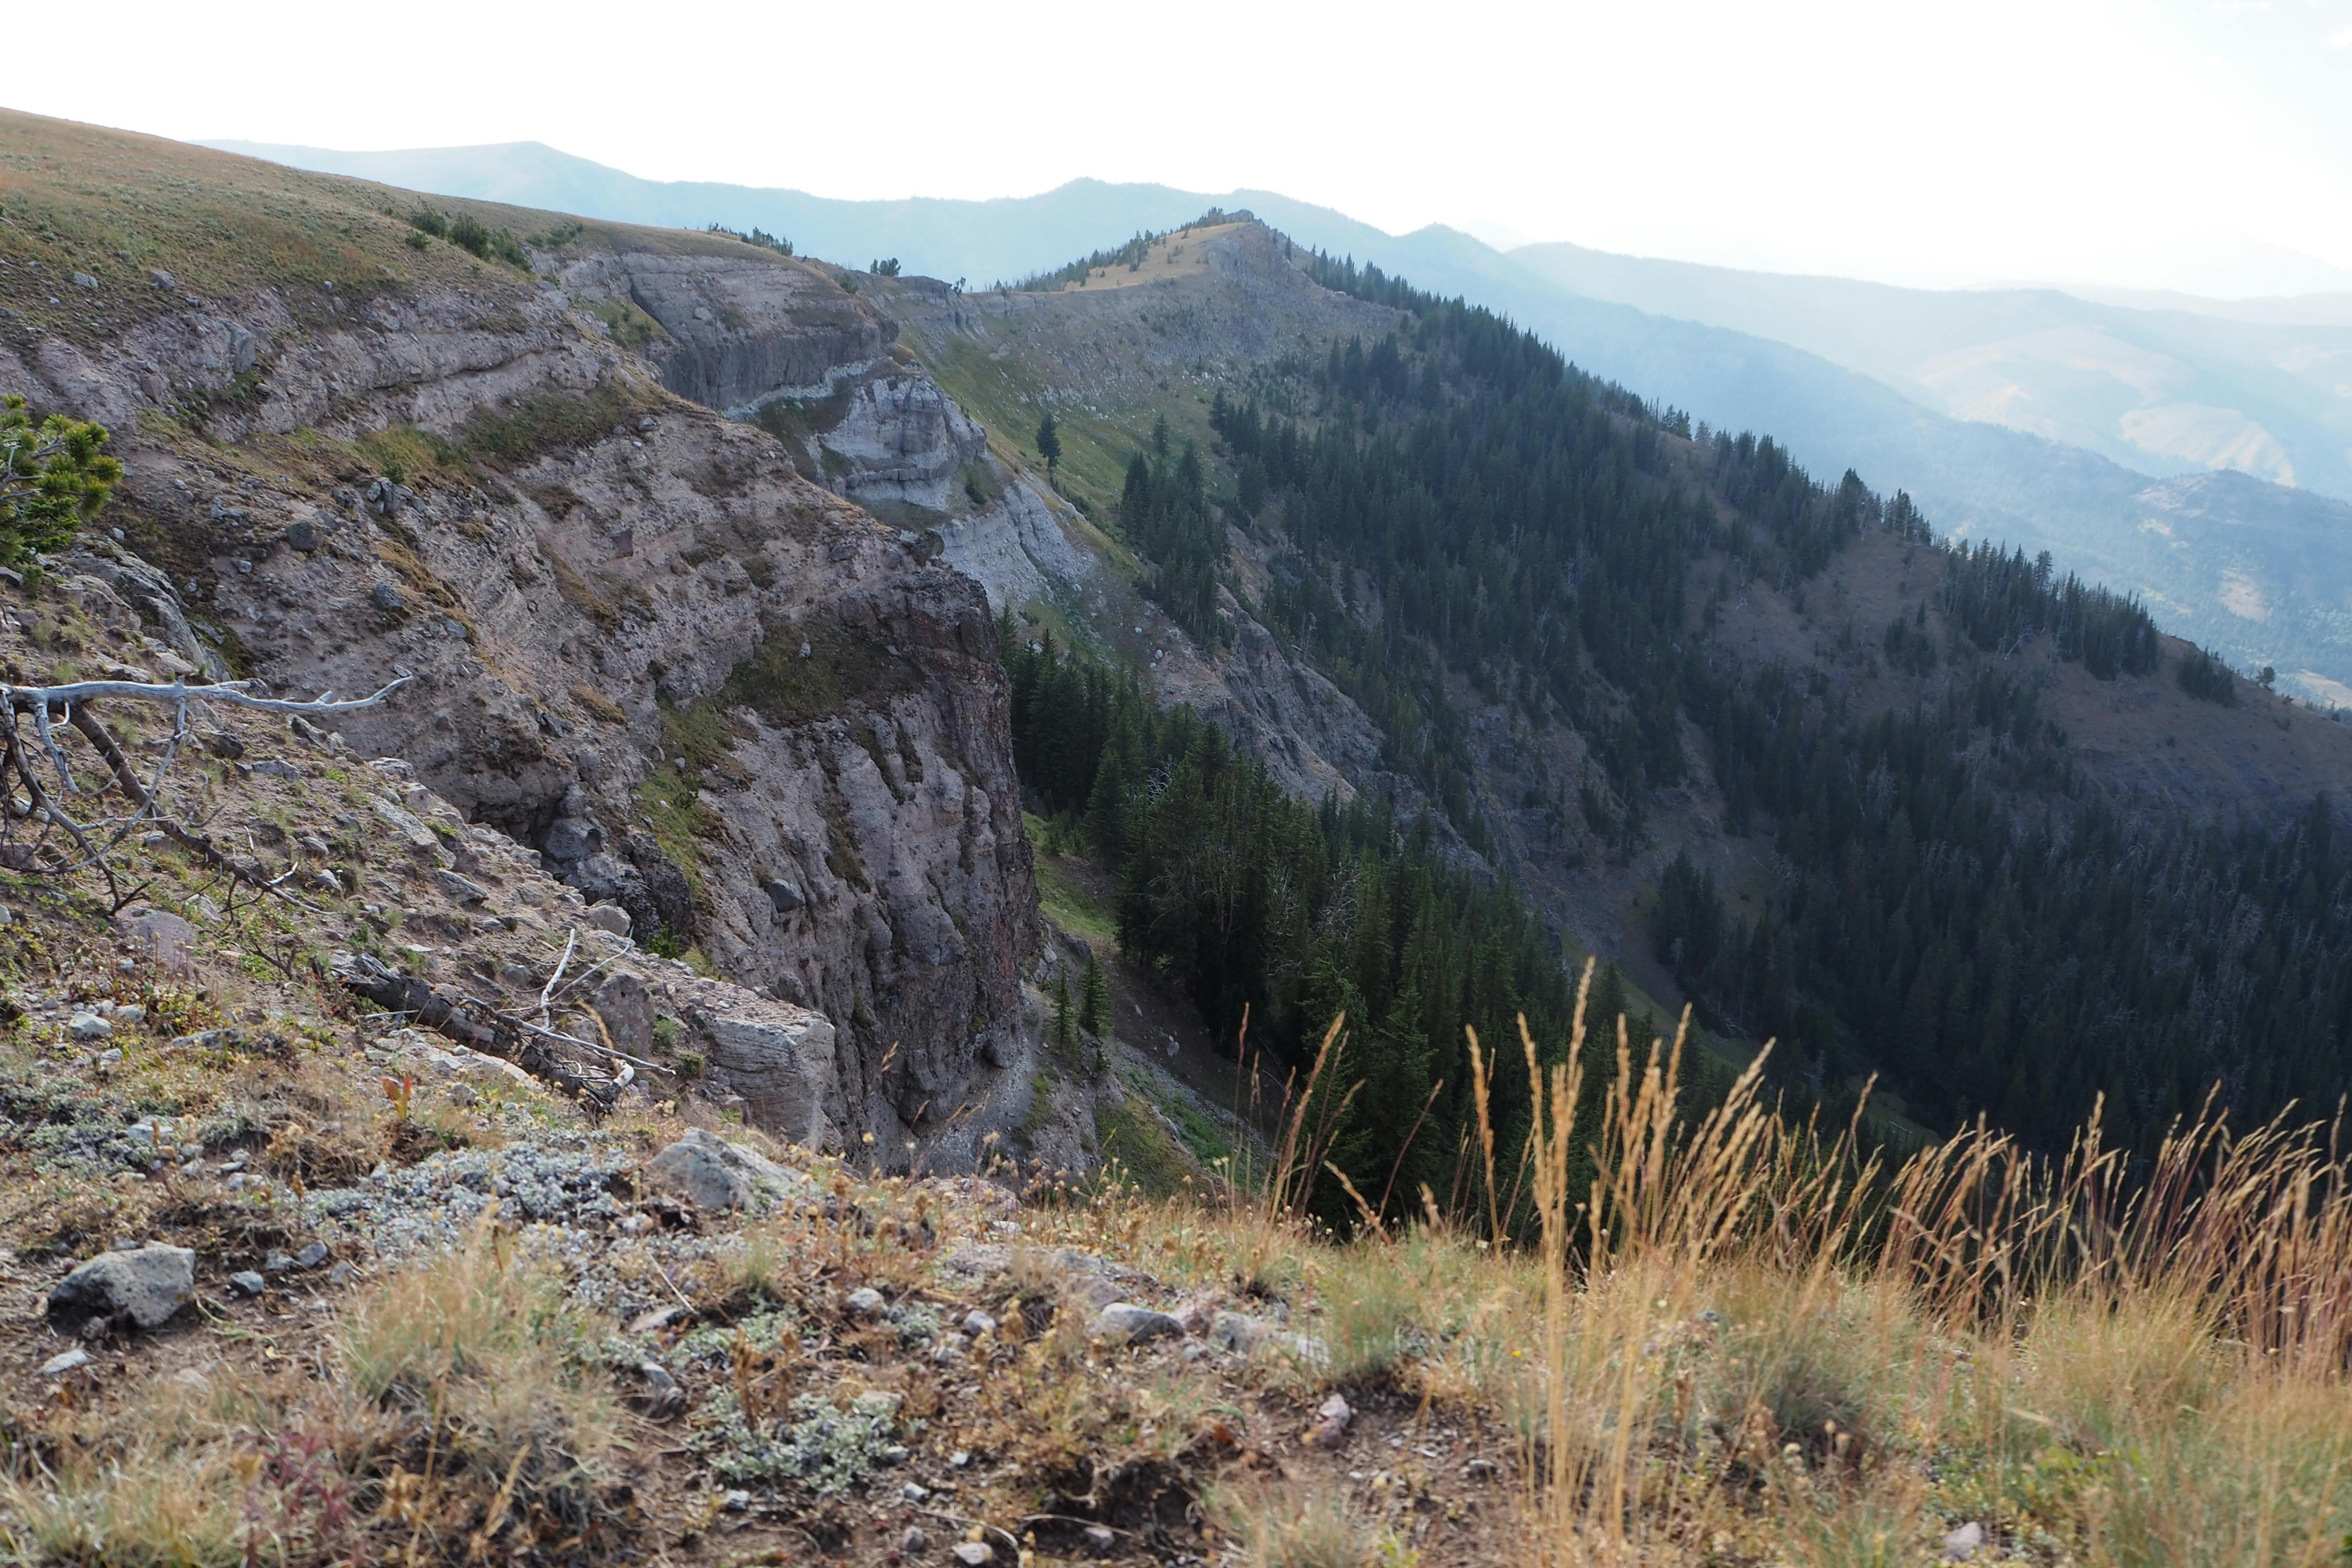 A view of cliffs on Sky Rim Trail